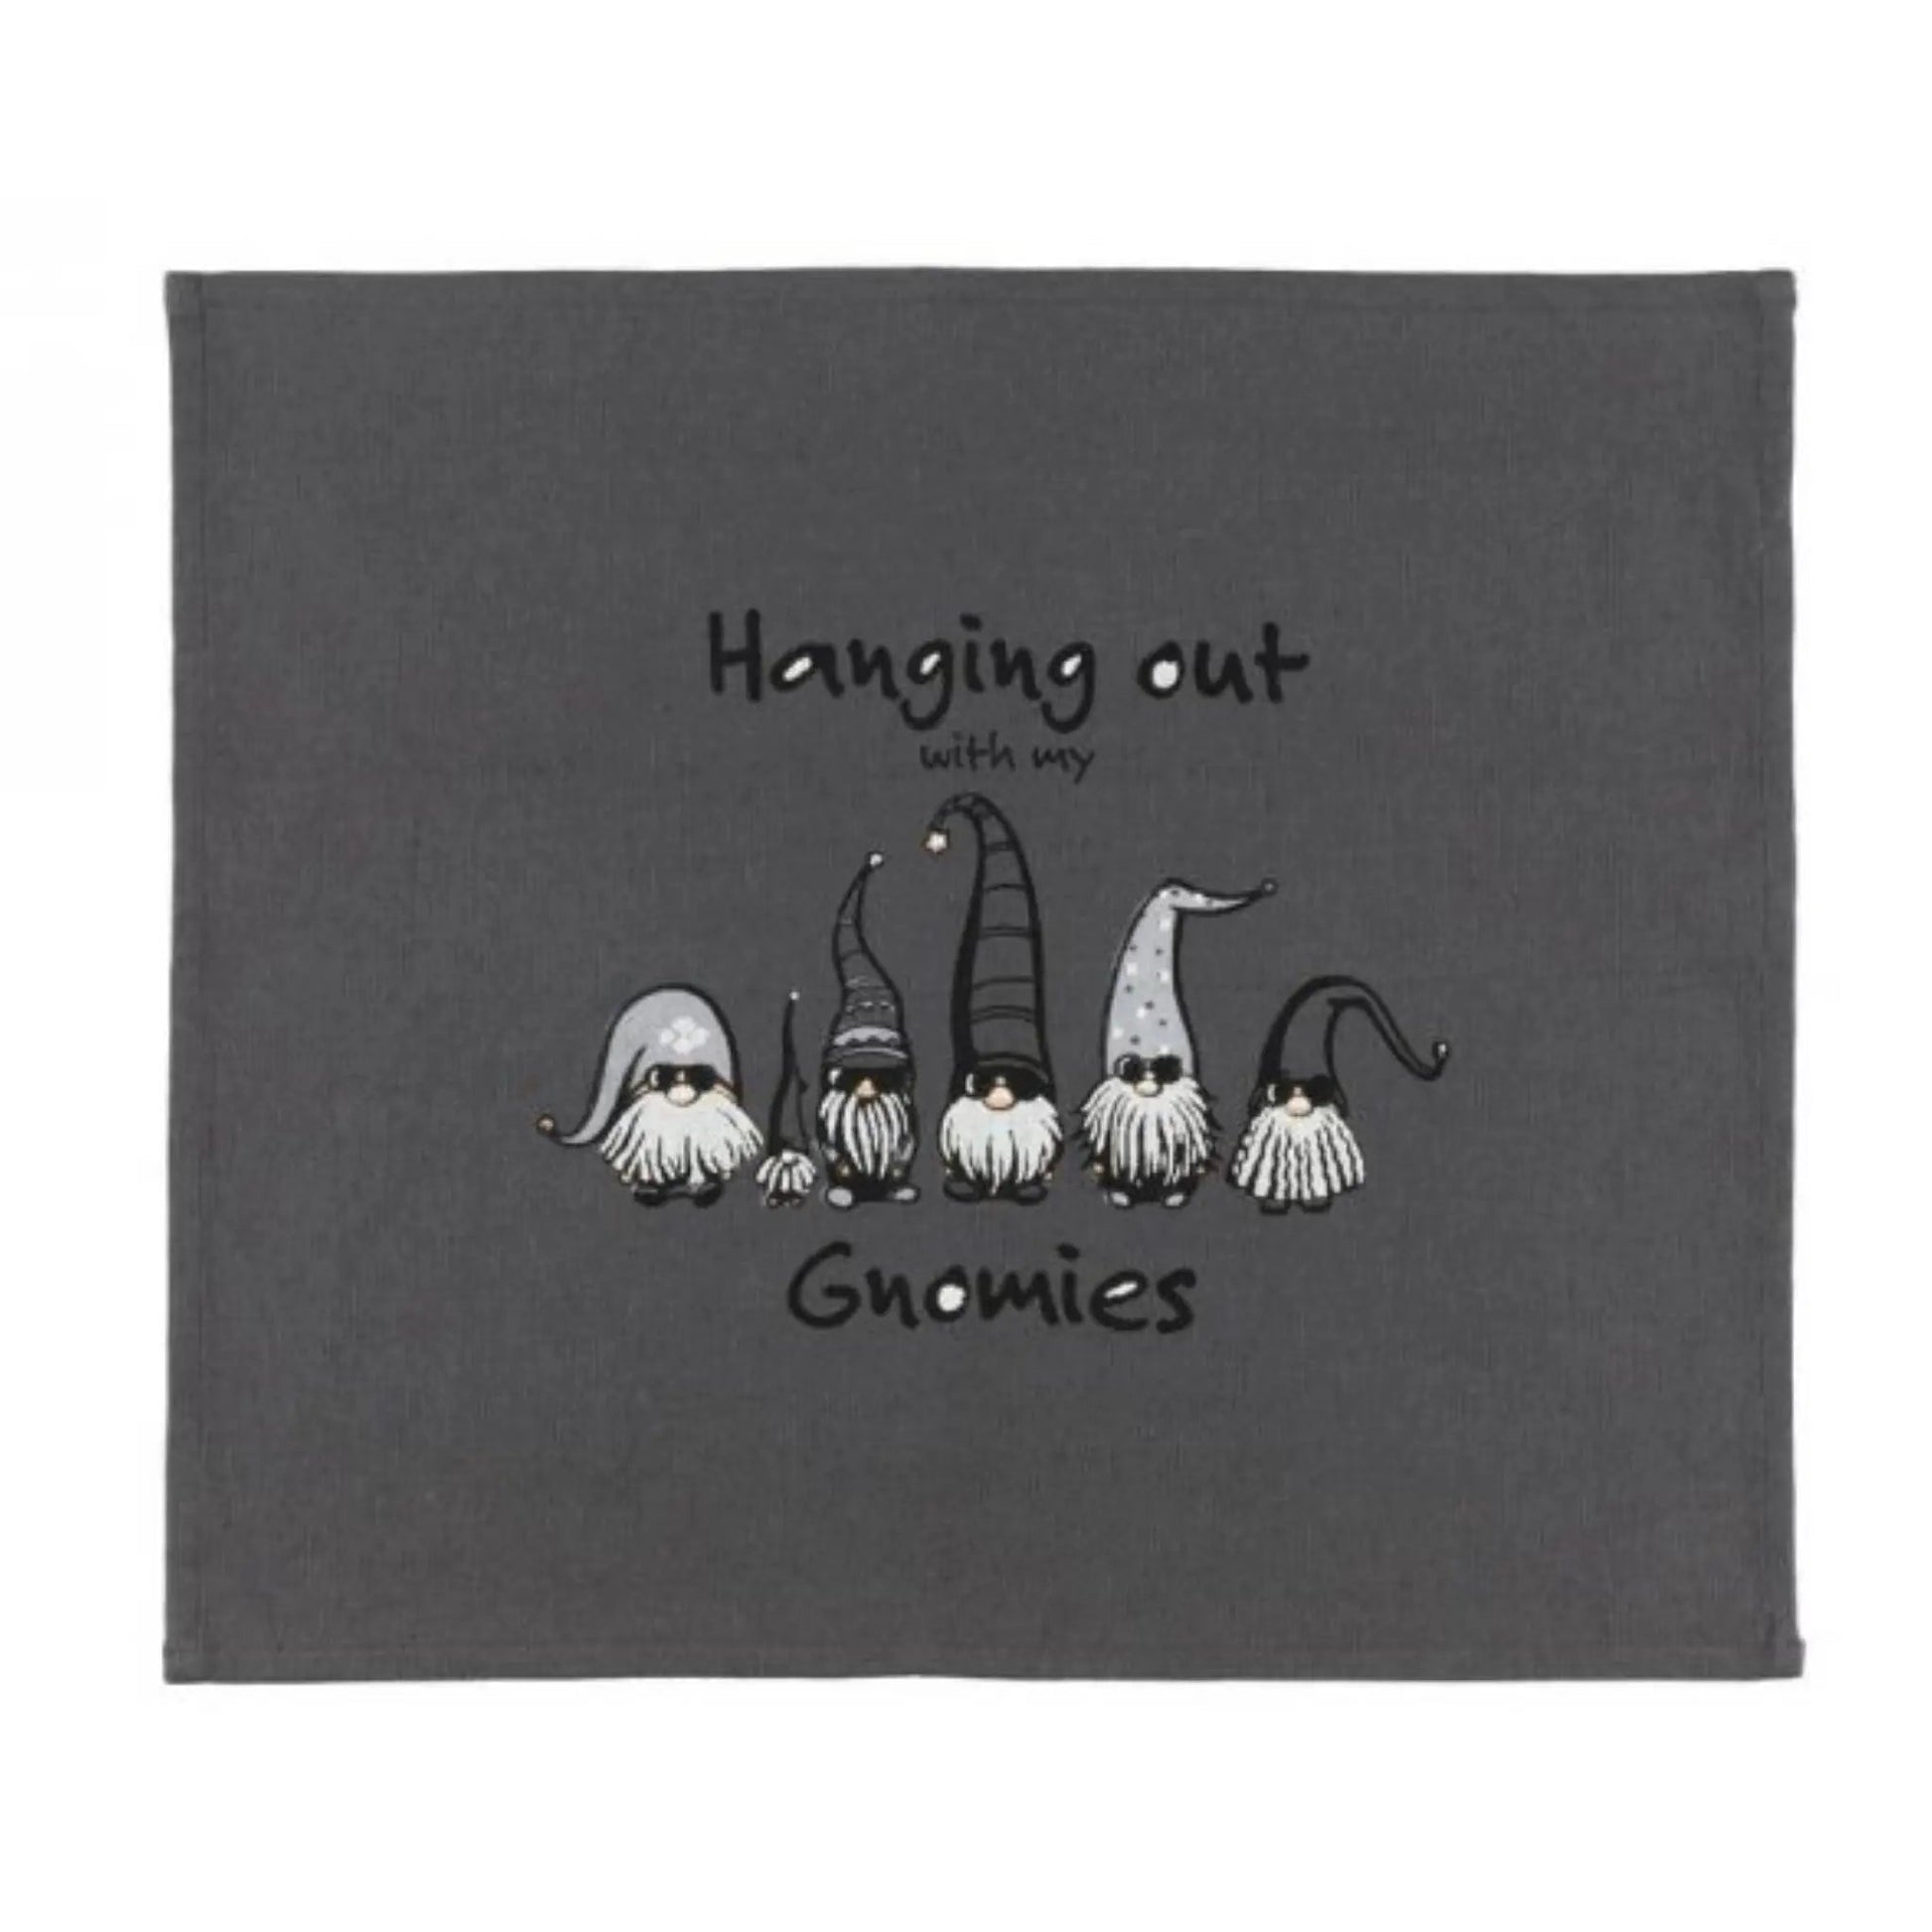 Sauna Seat Cover "Hanging out with my Gnomies" Grey Sauna Seat Cover | Finnmark Sauna